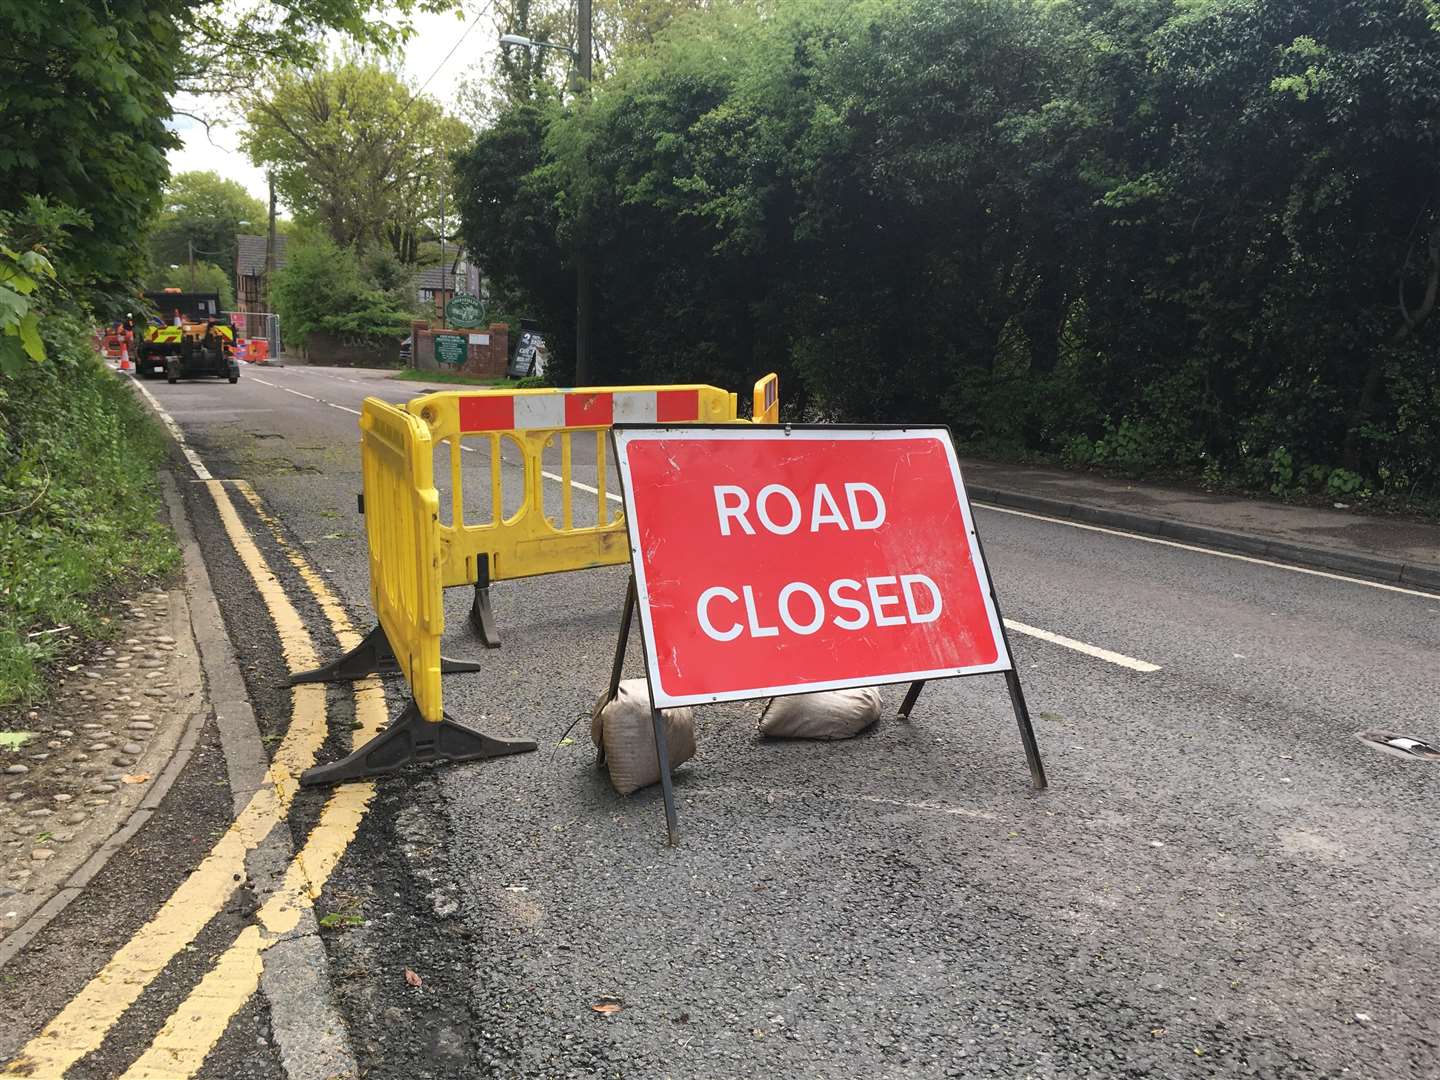 Sturry Hill has been closed since Monday